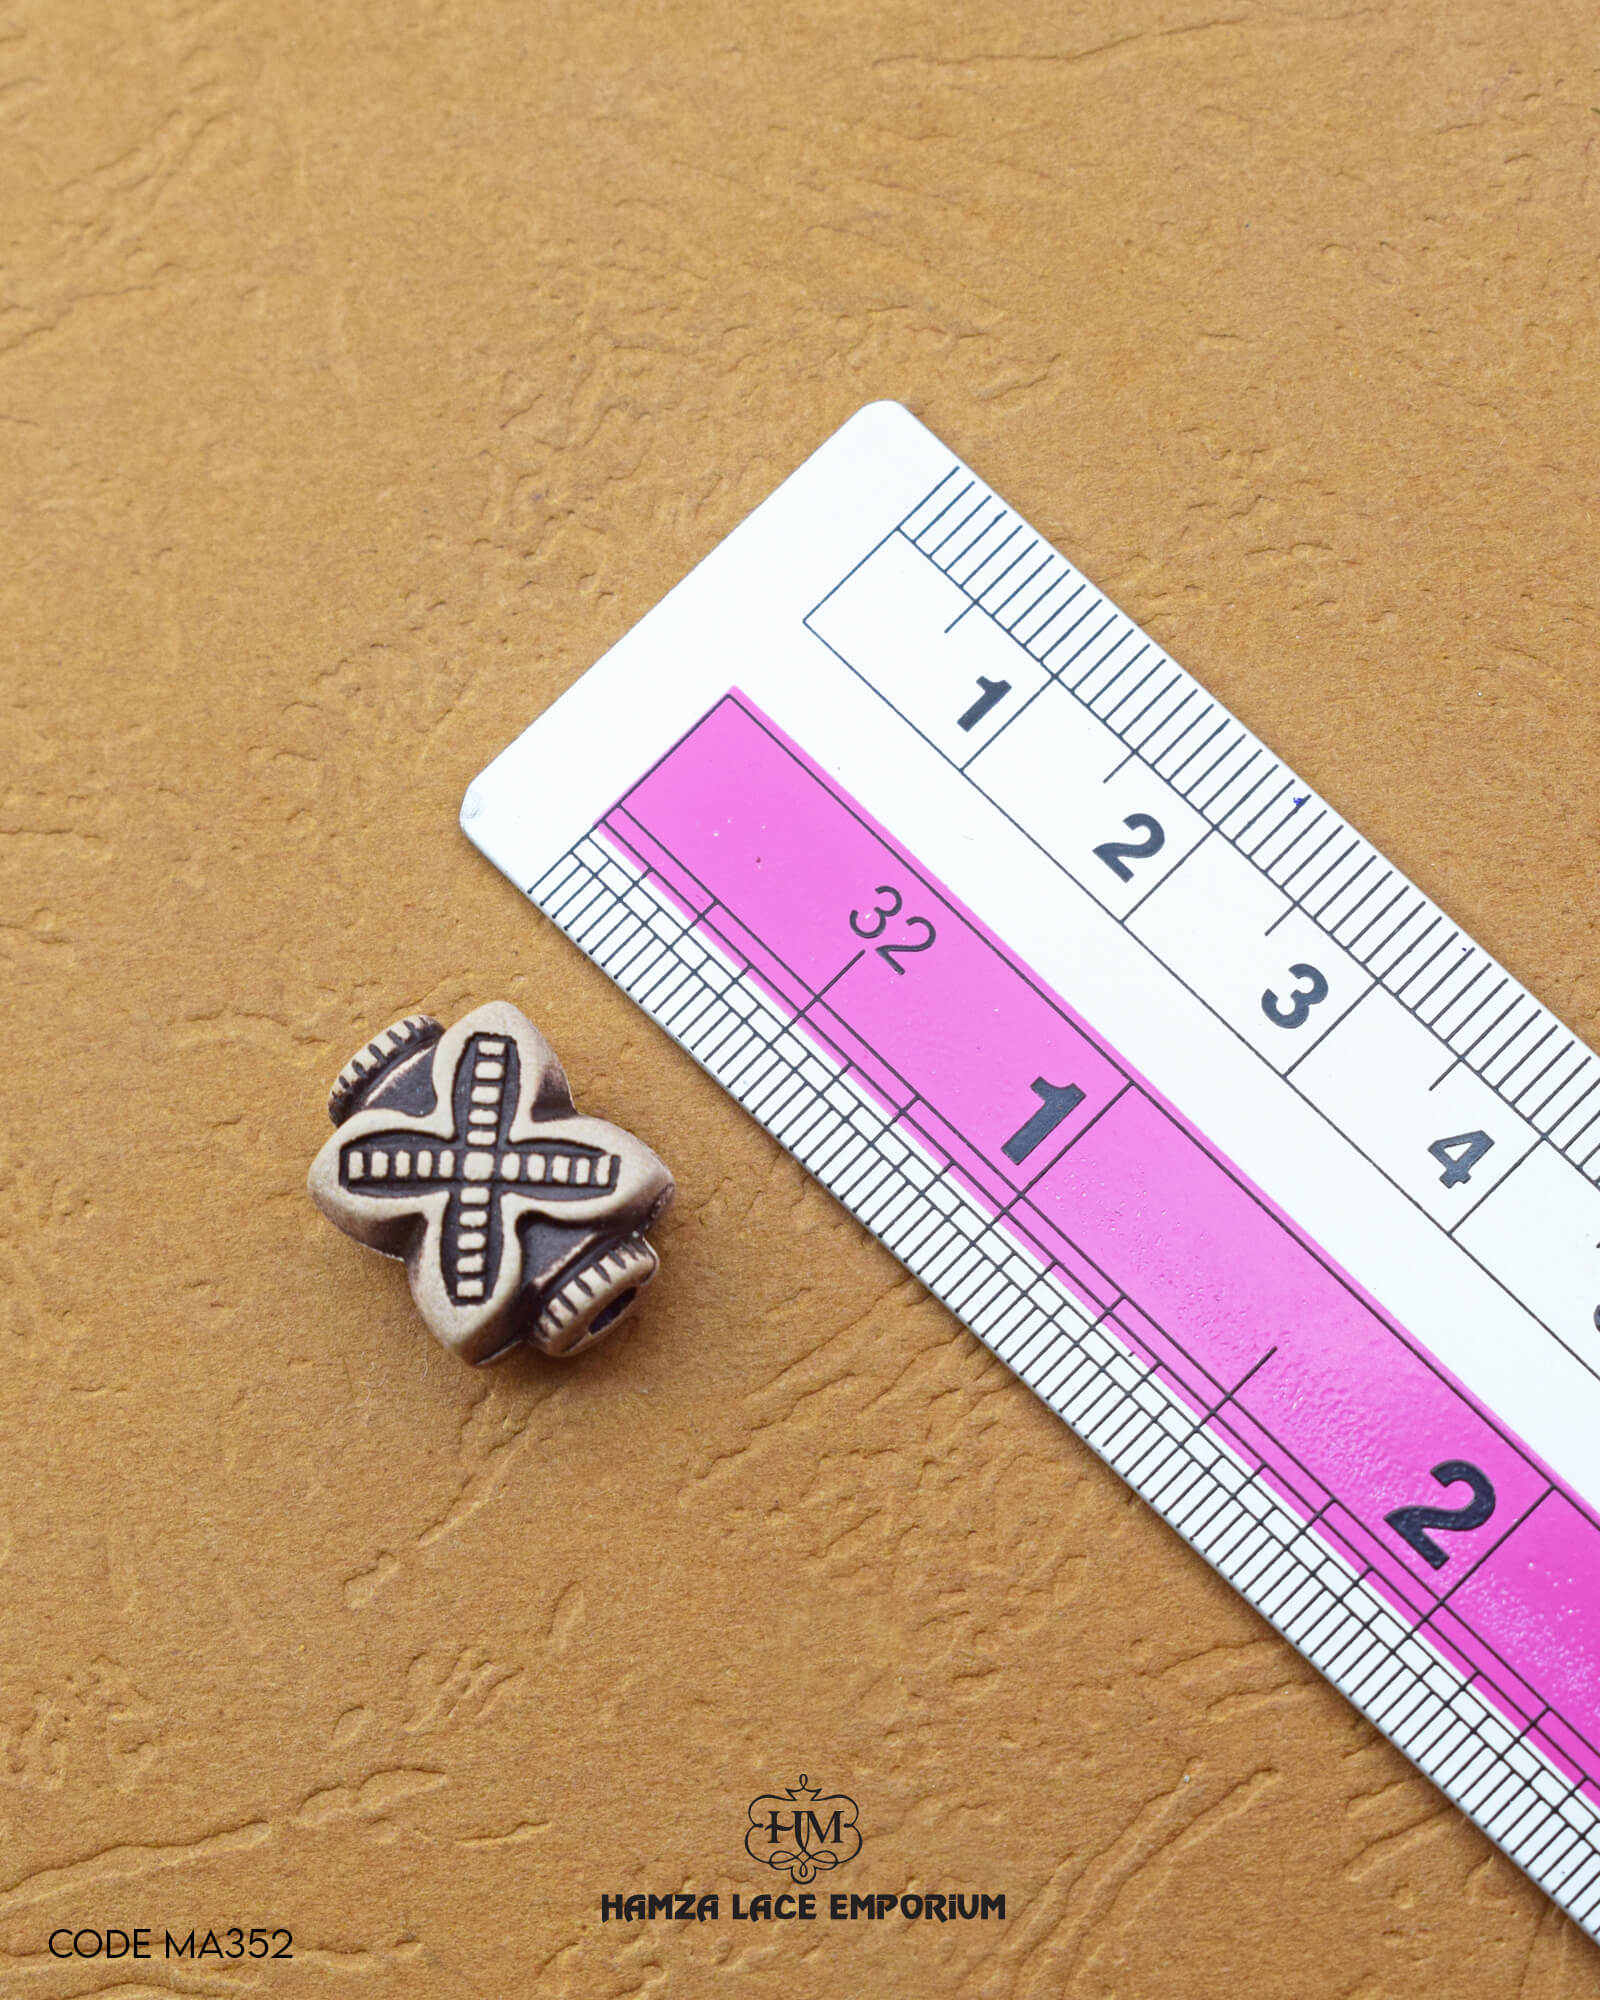 Size of the 'Cross Design Button MA352' is shown with a ruler